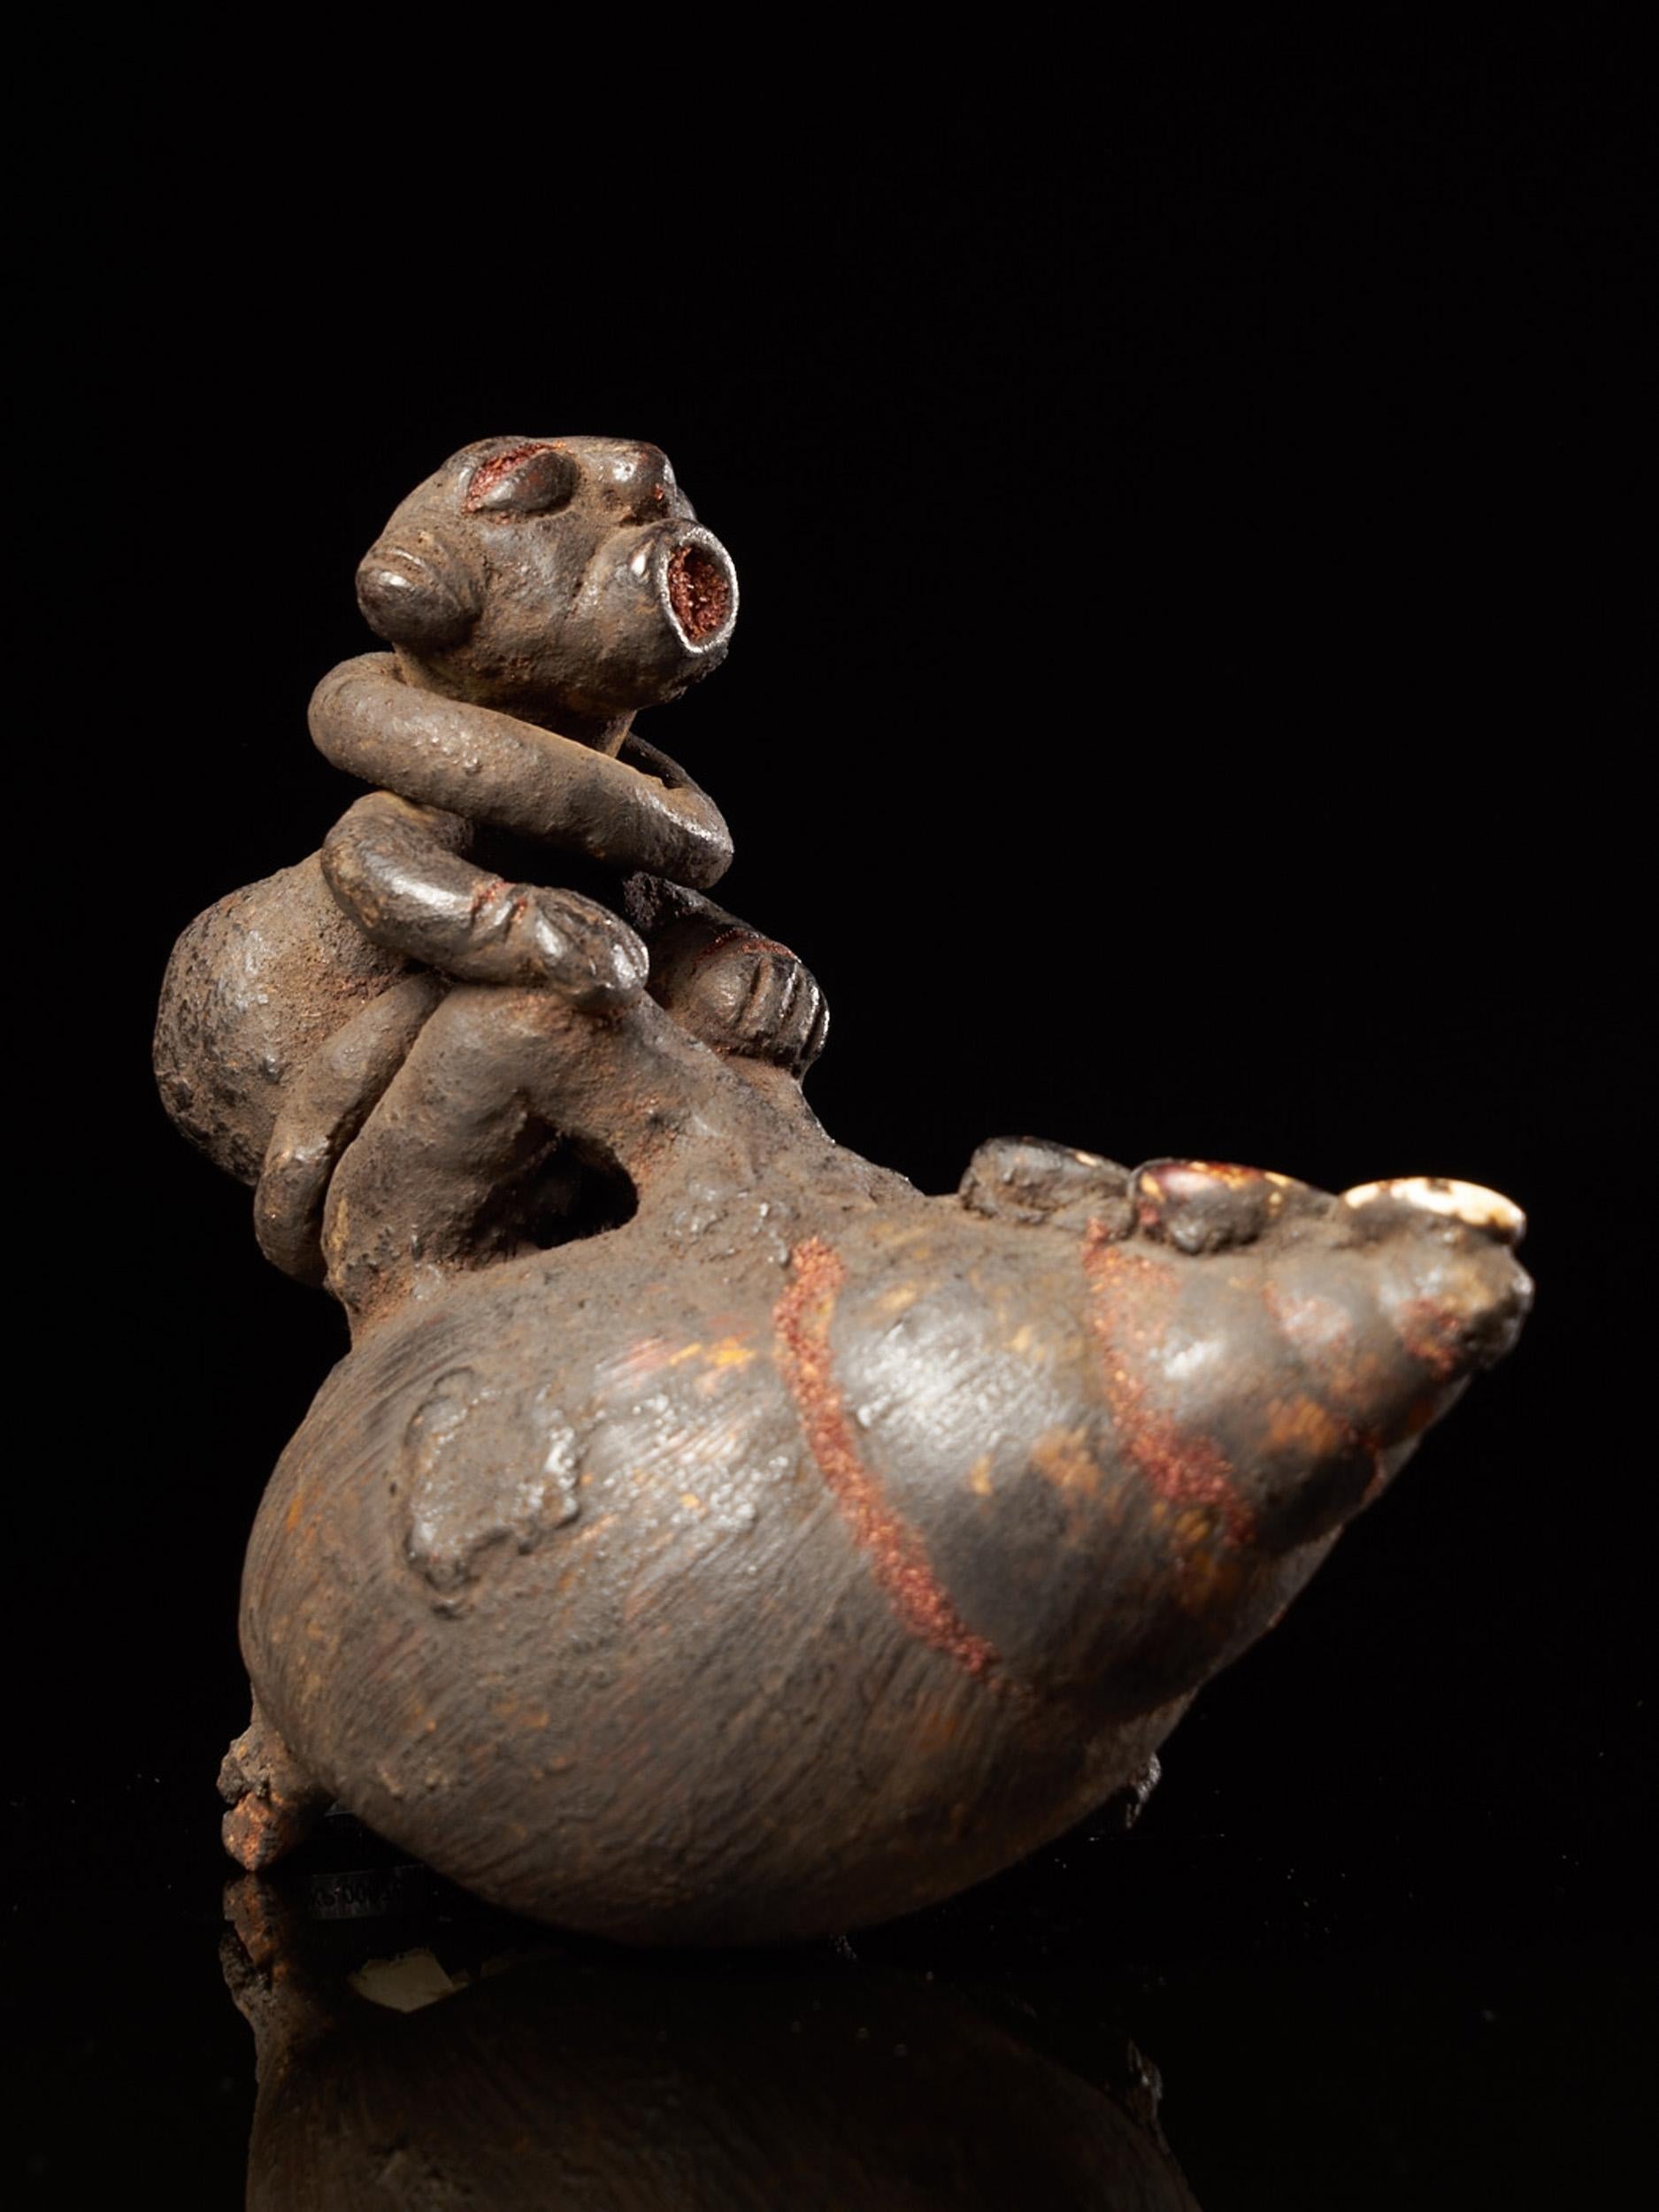 Hand-Carved Ceremonial Monkey Figure on a Snailshell, Old German Collection, Bulu People